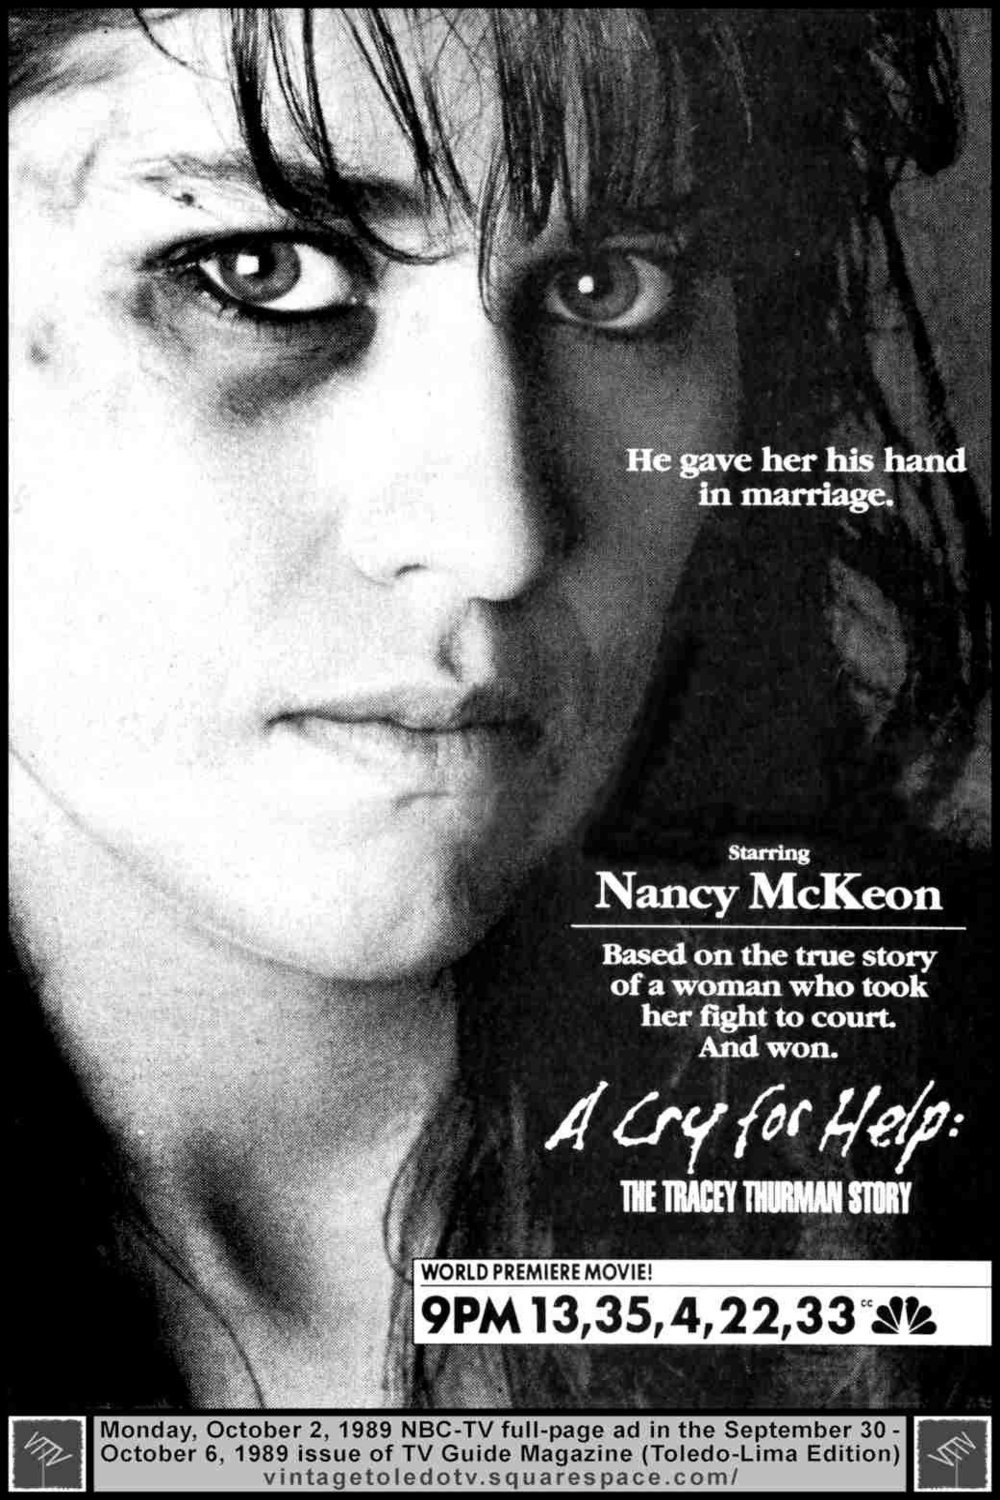 L'affiche du film A Cry for Help: The Tracey Thurman Story